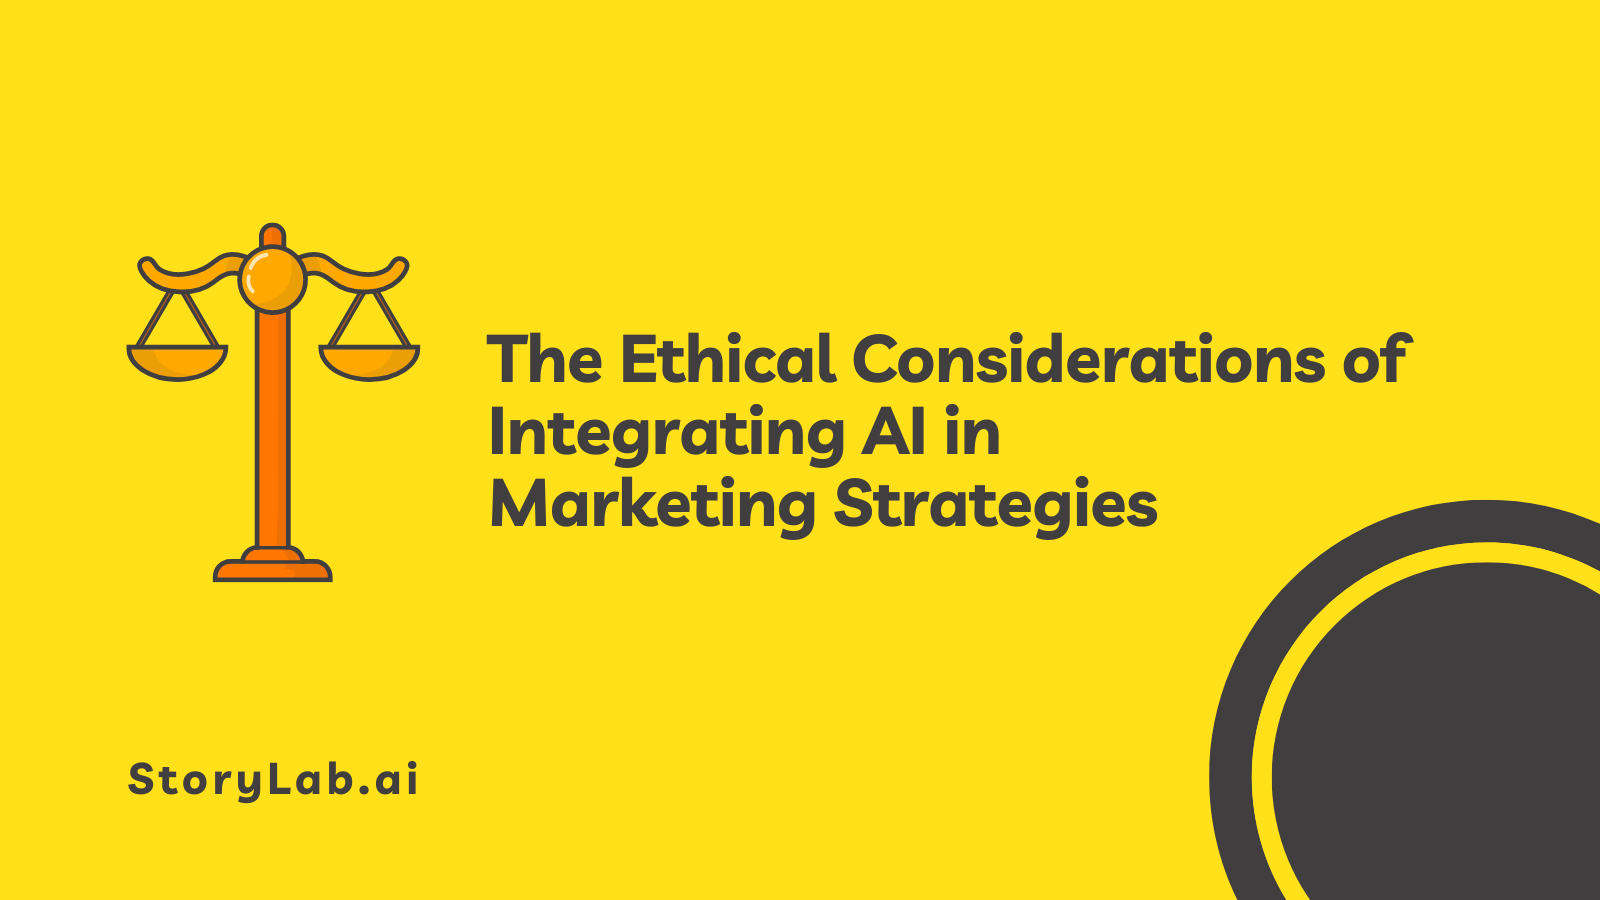 The Ethical Considerations of Integrating AI in Marketing Strategies